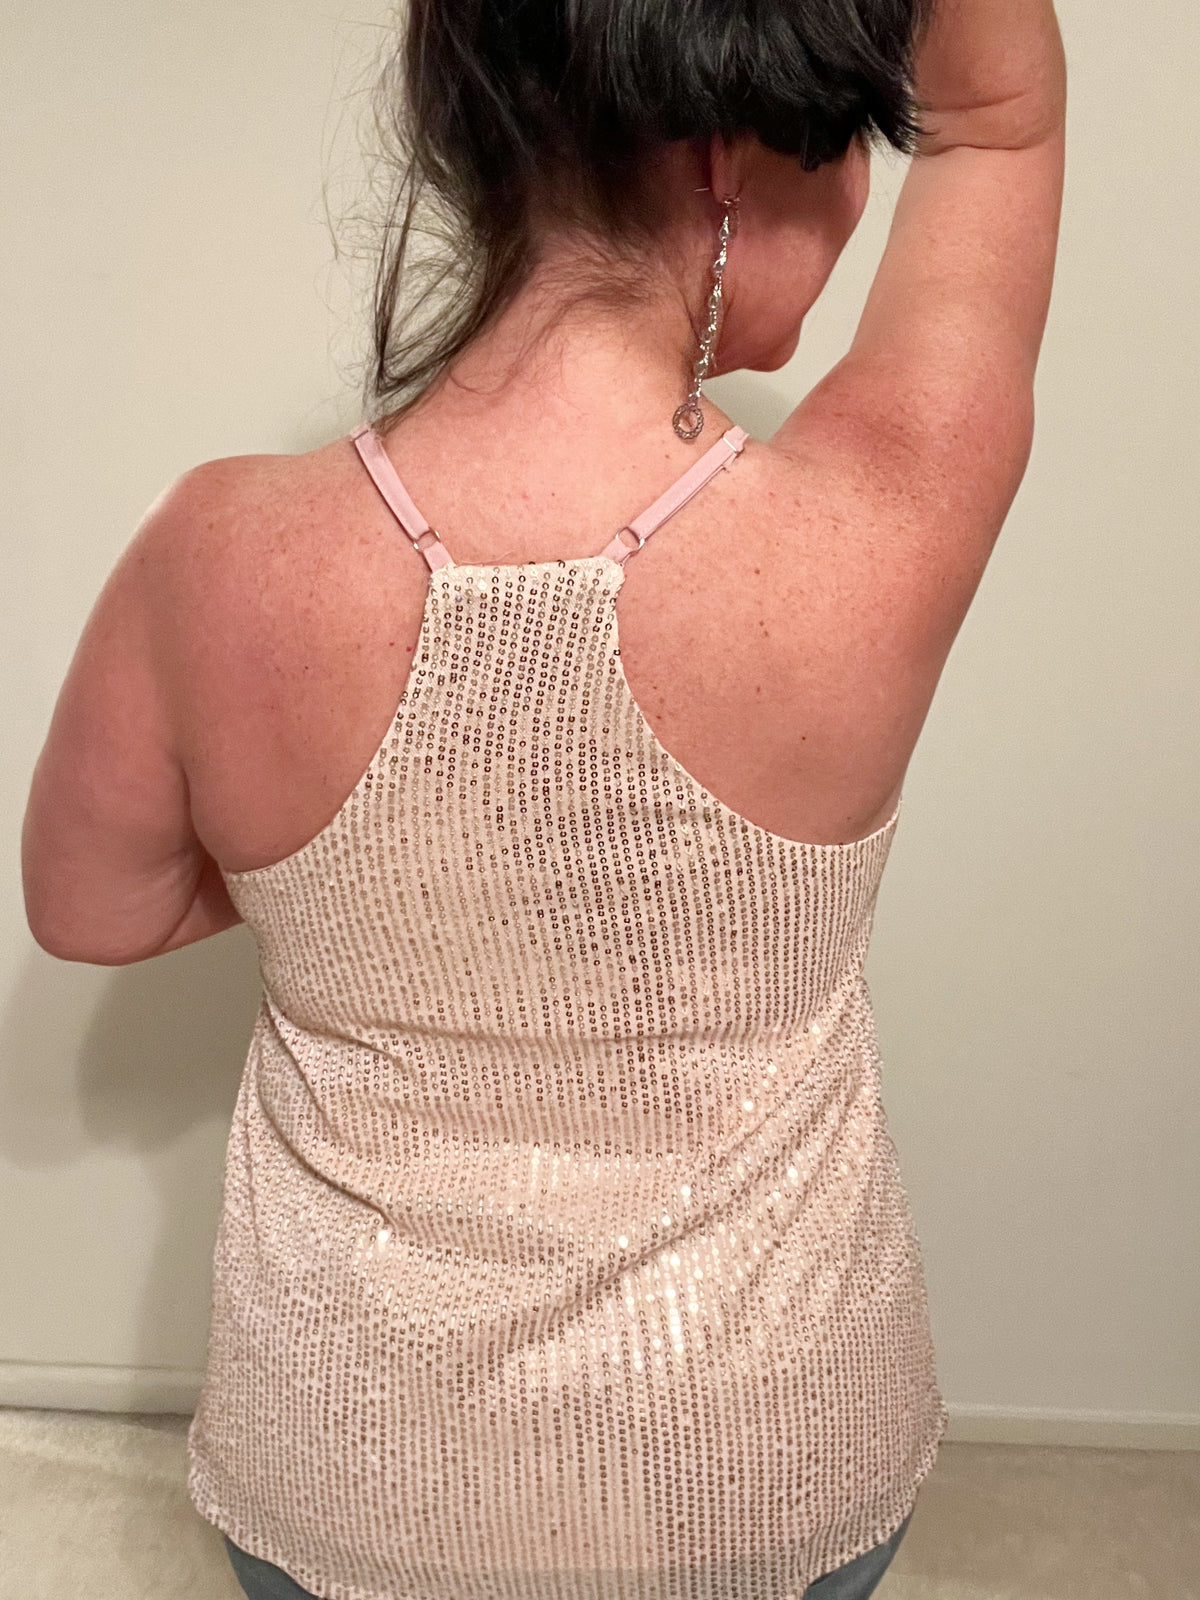 Sparkly Bling Cami Sequin Racerback Tank Adjustable Straps V-neckline Lined Material: 95% polyester, 5% spandex Stretchy True to Size 5 colors: Apricot Cream Off-white, Red Wine Burgundy, Black, Royal Navy Blue, Blush Pink